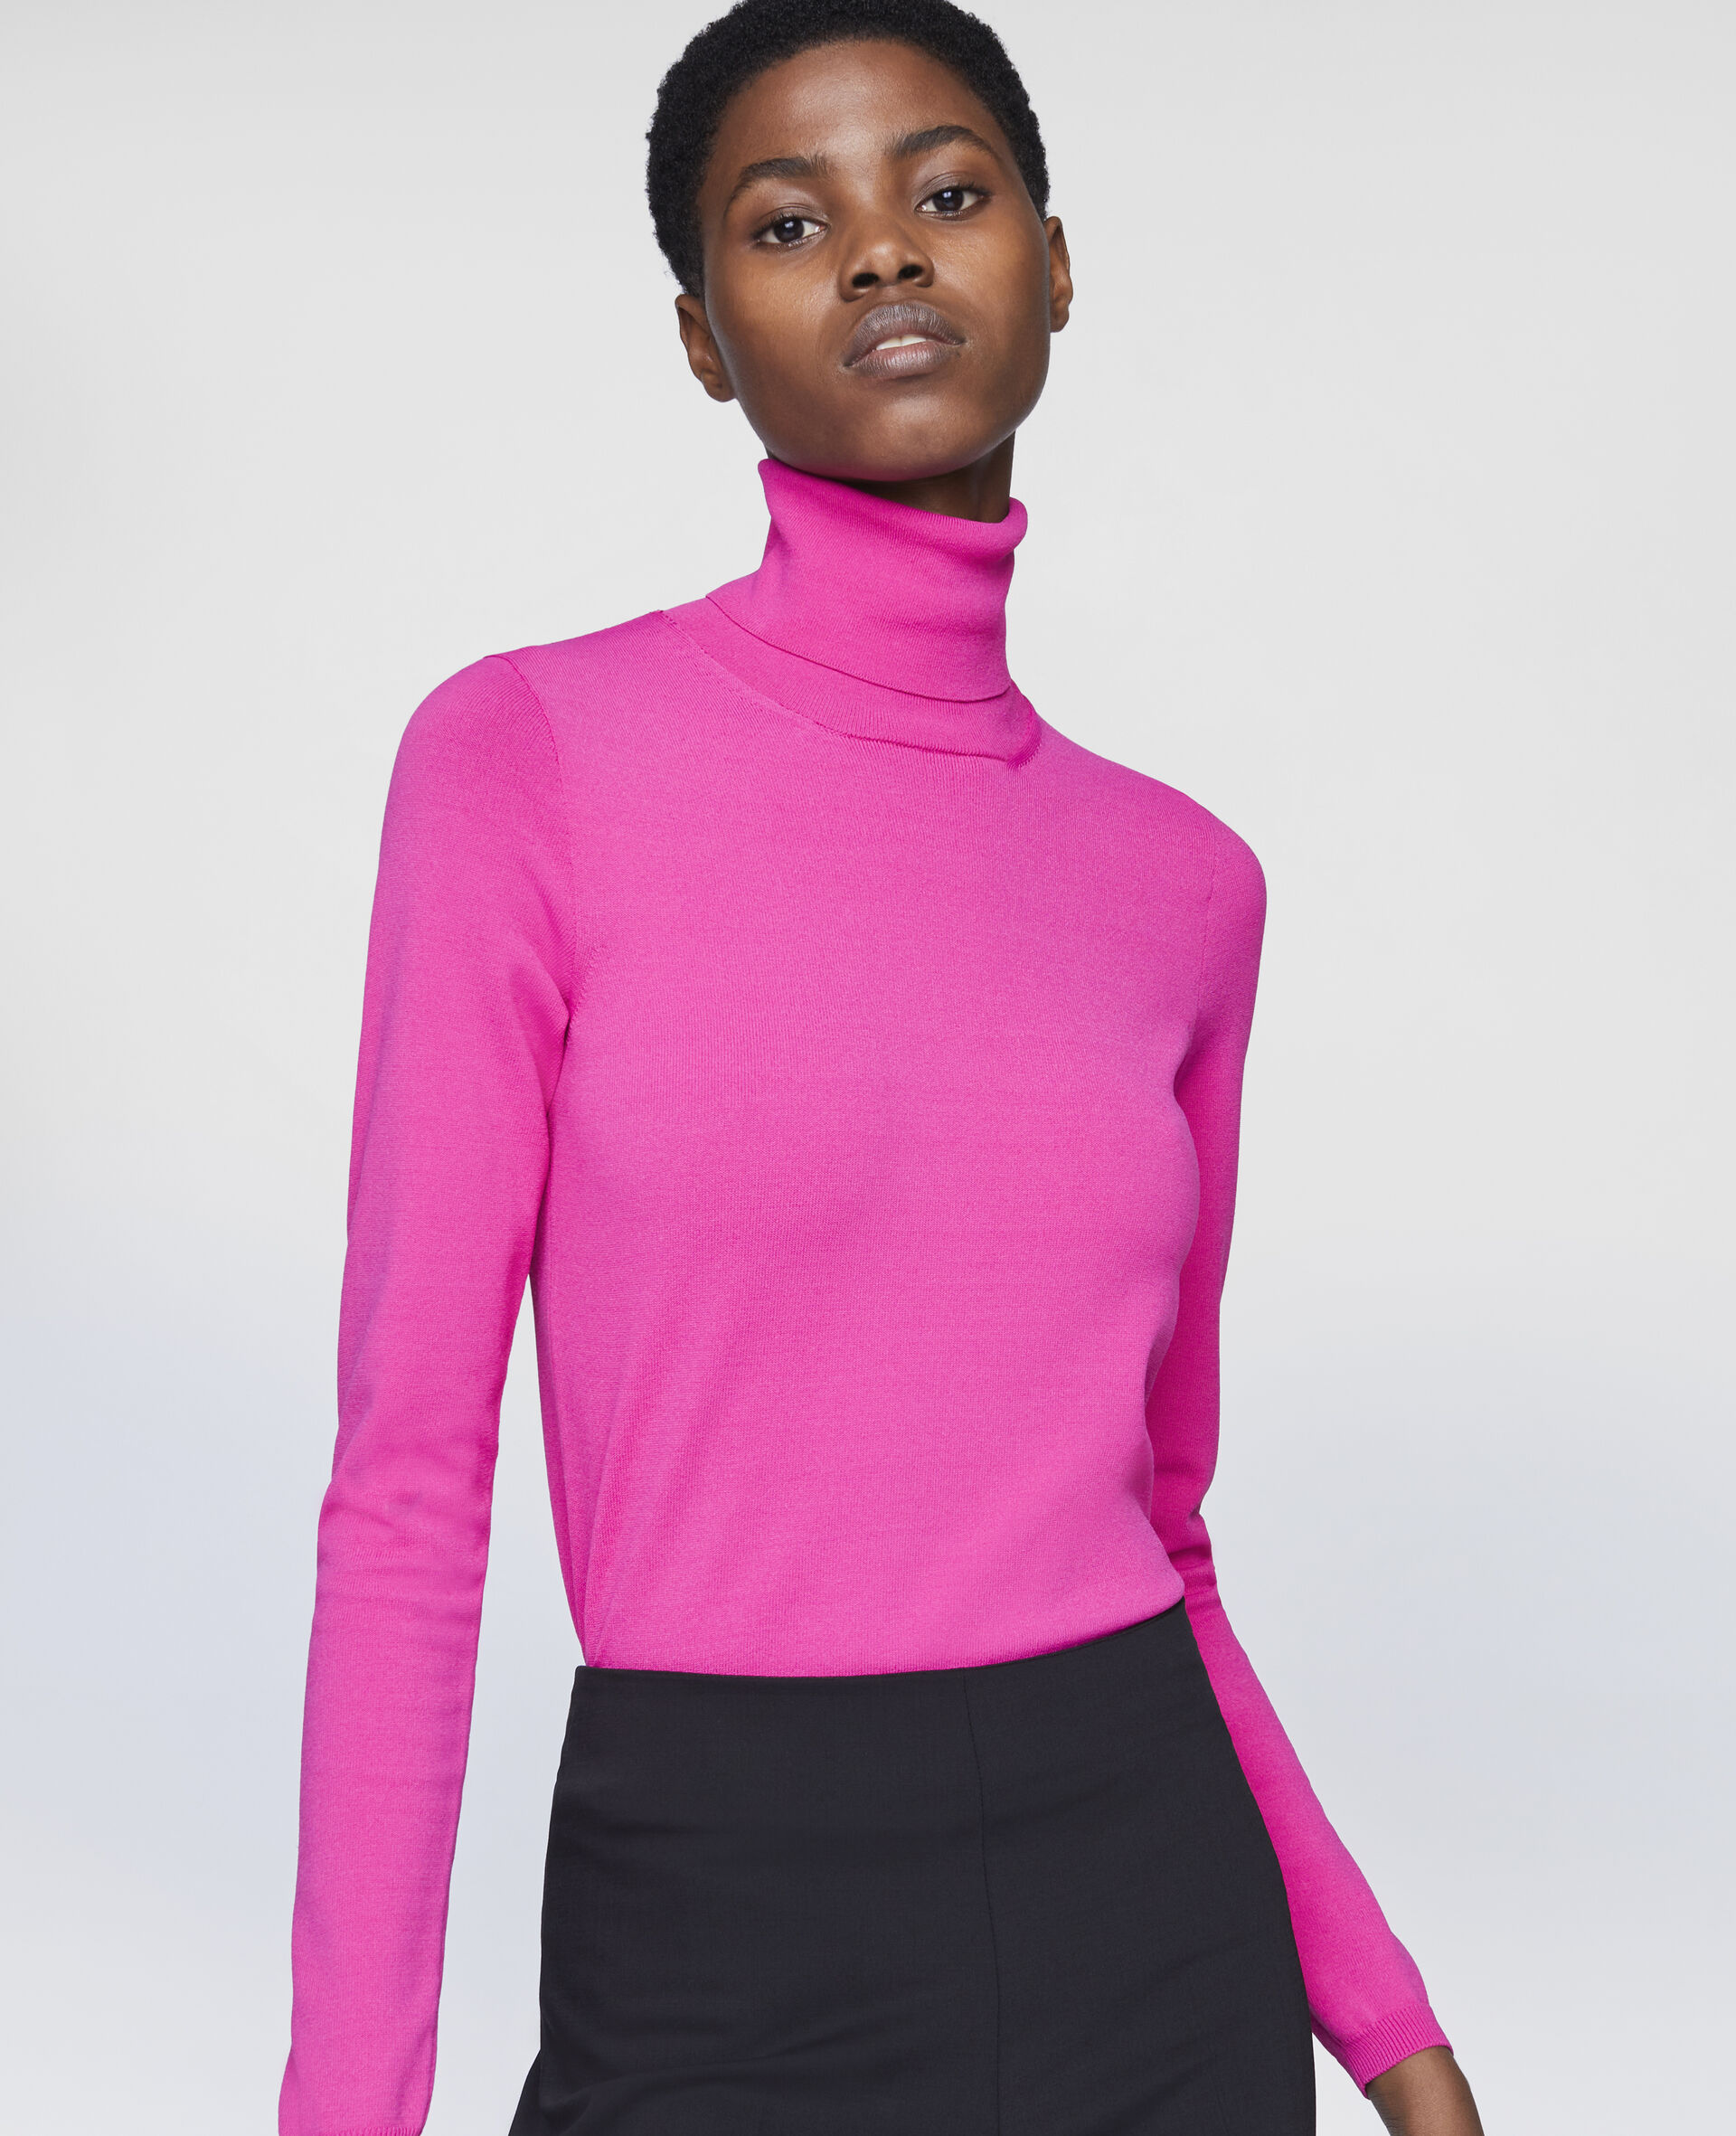 Compact Knit Top-Pink-large image number 2